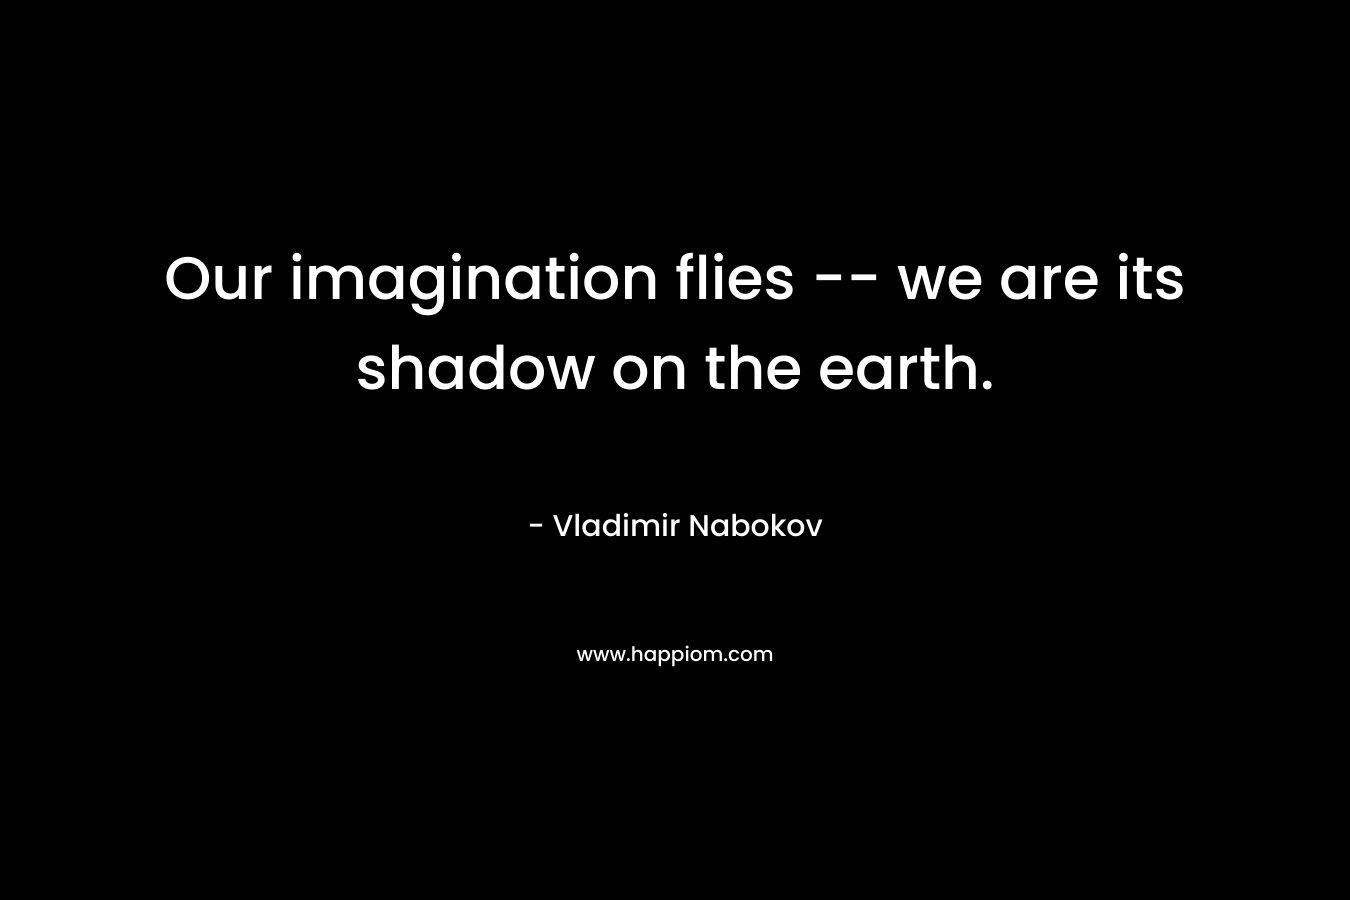 Our imagination flies -- we are its shadow on the earth.